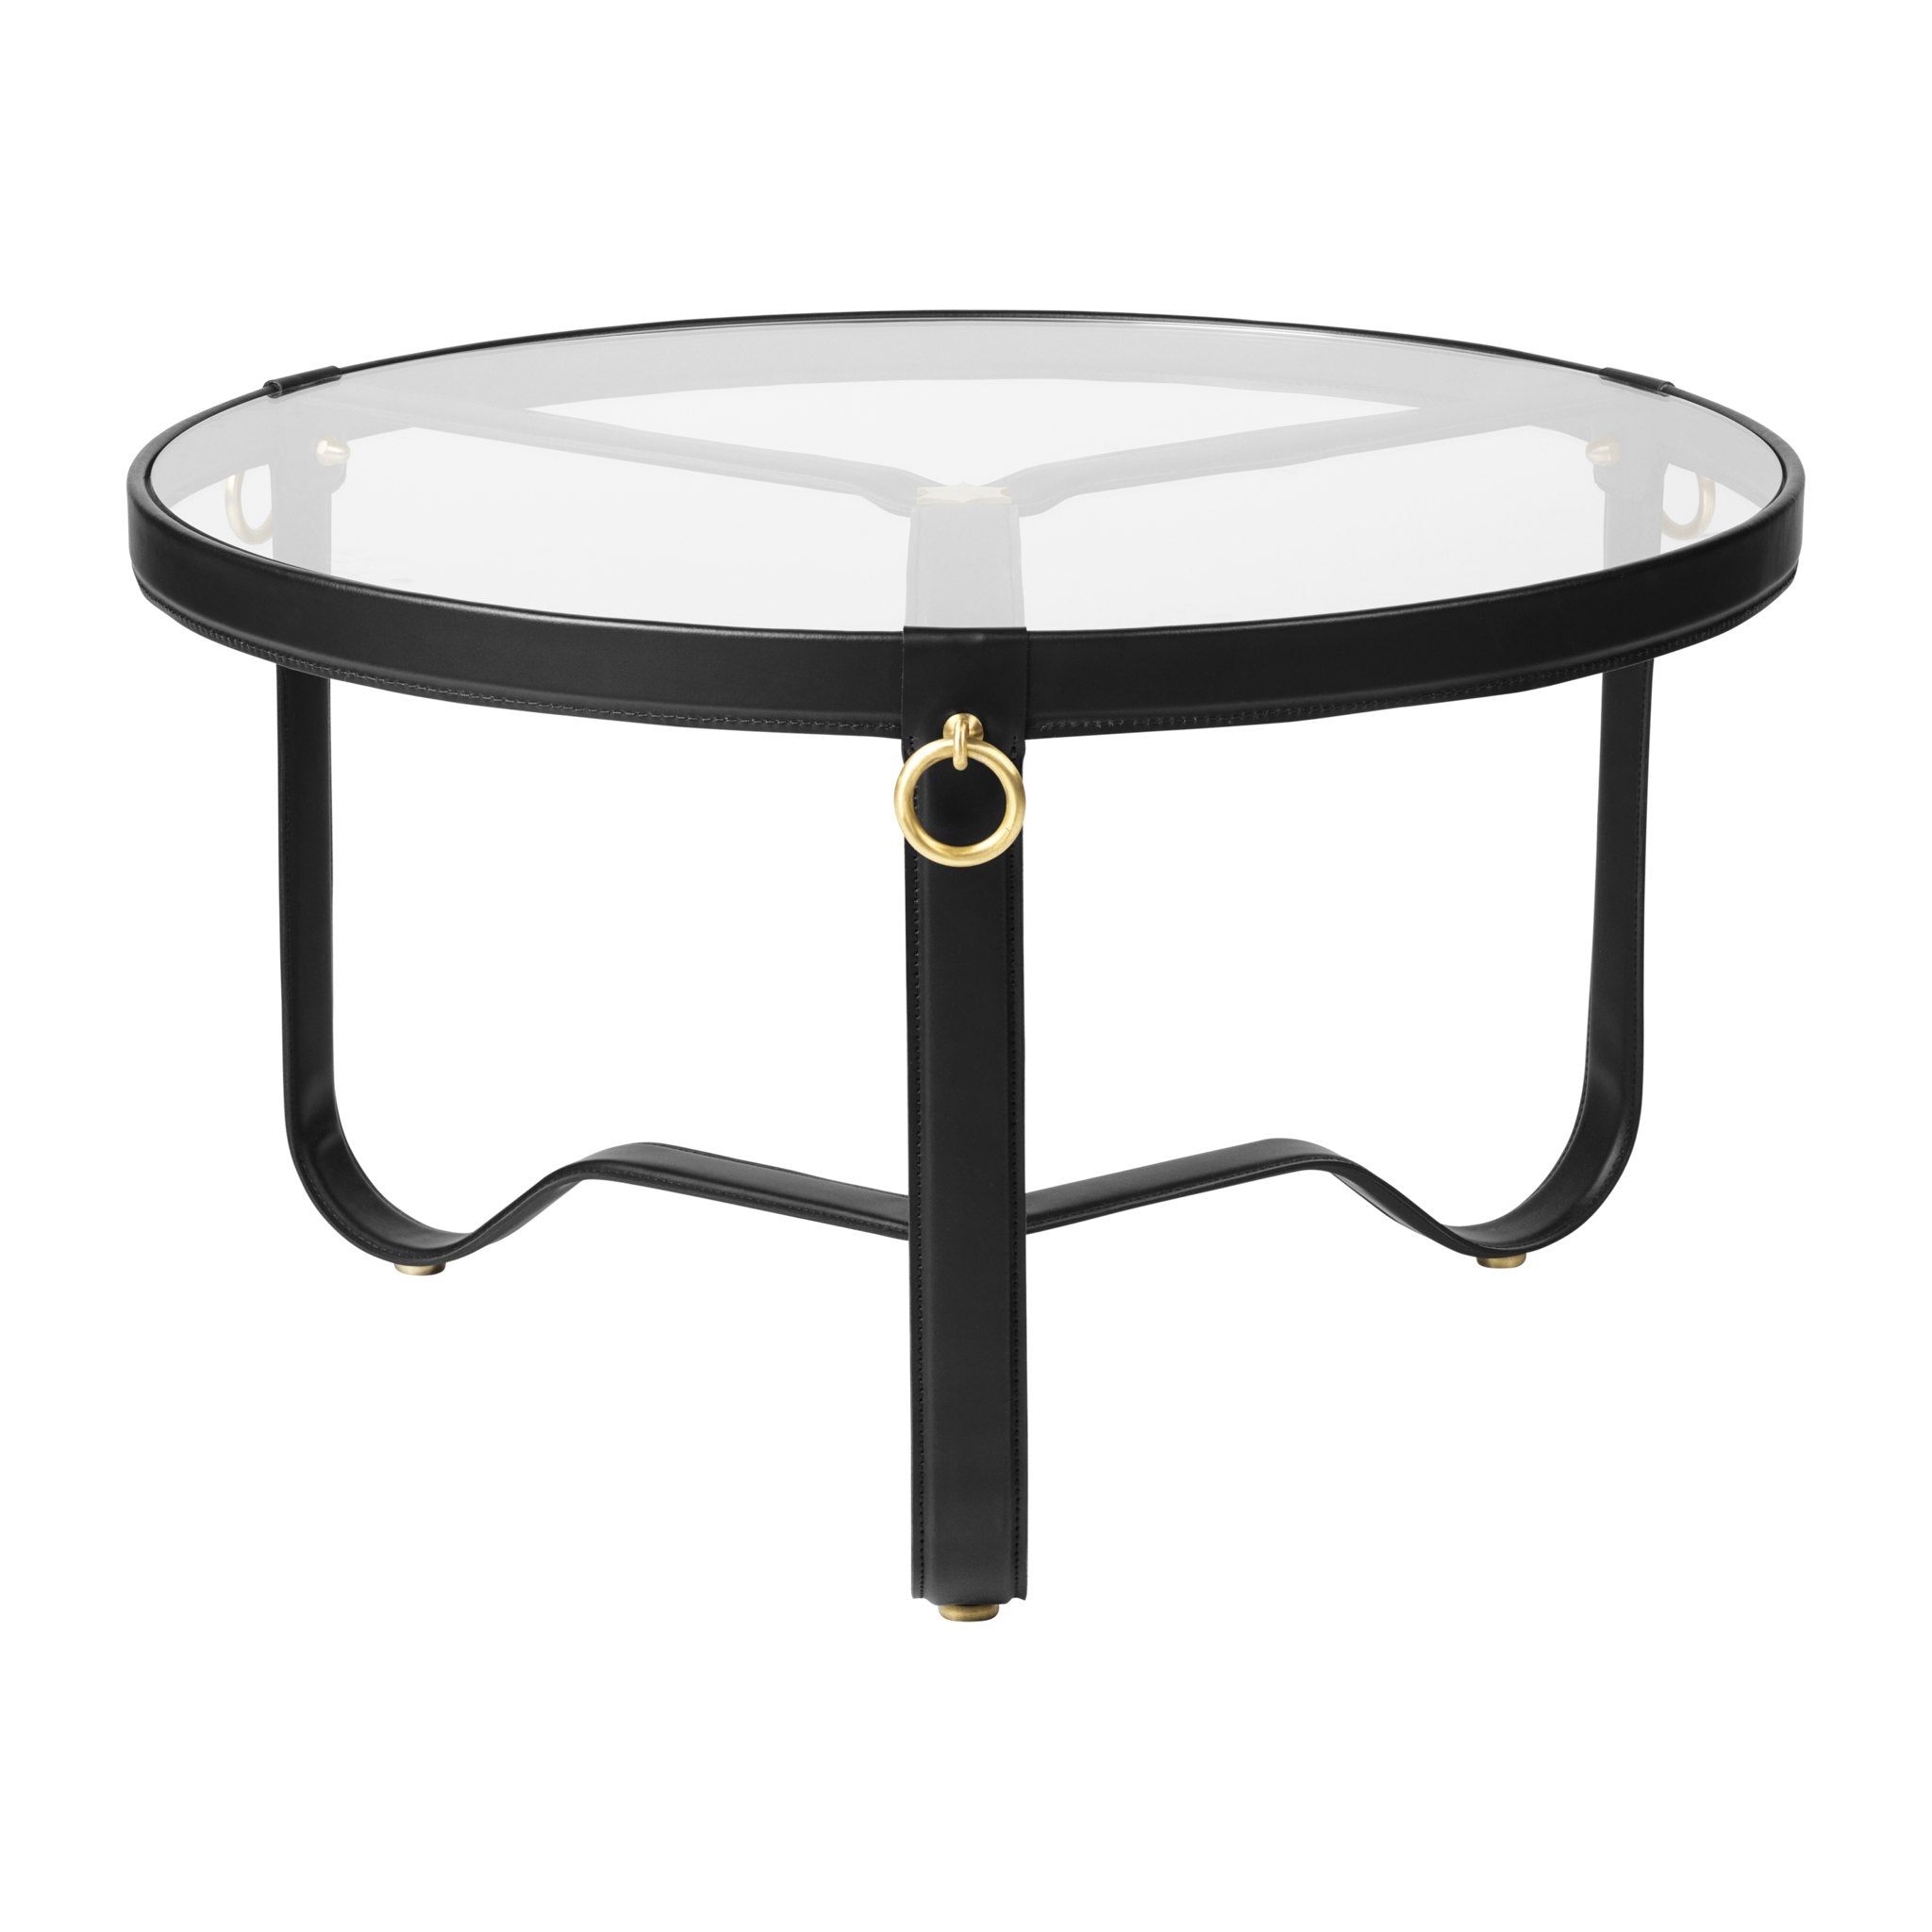 Adnet Coffee Table by Gubi